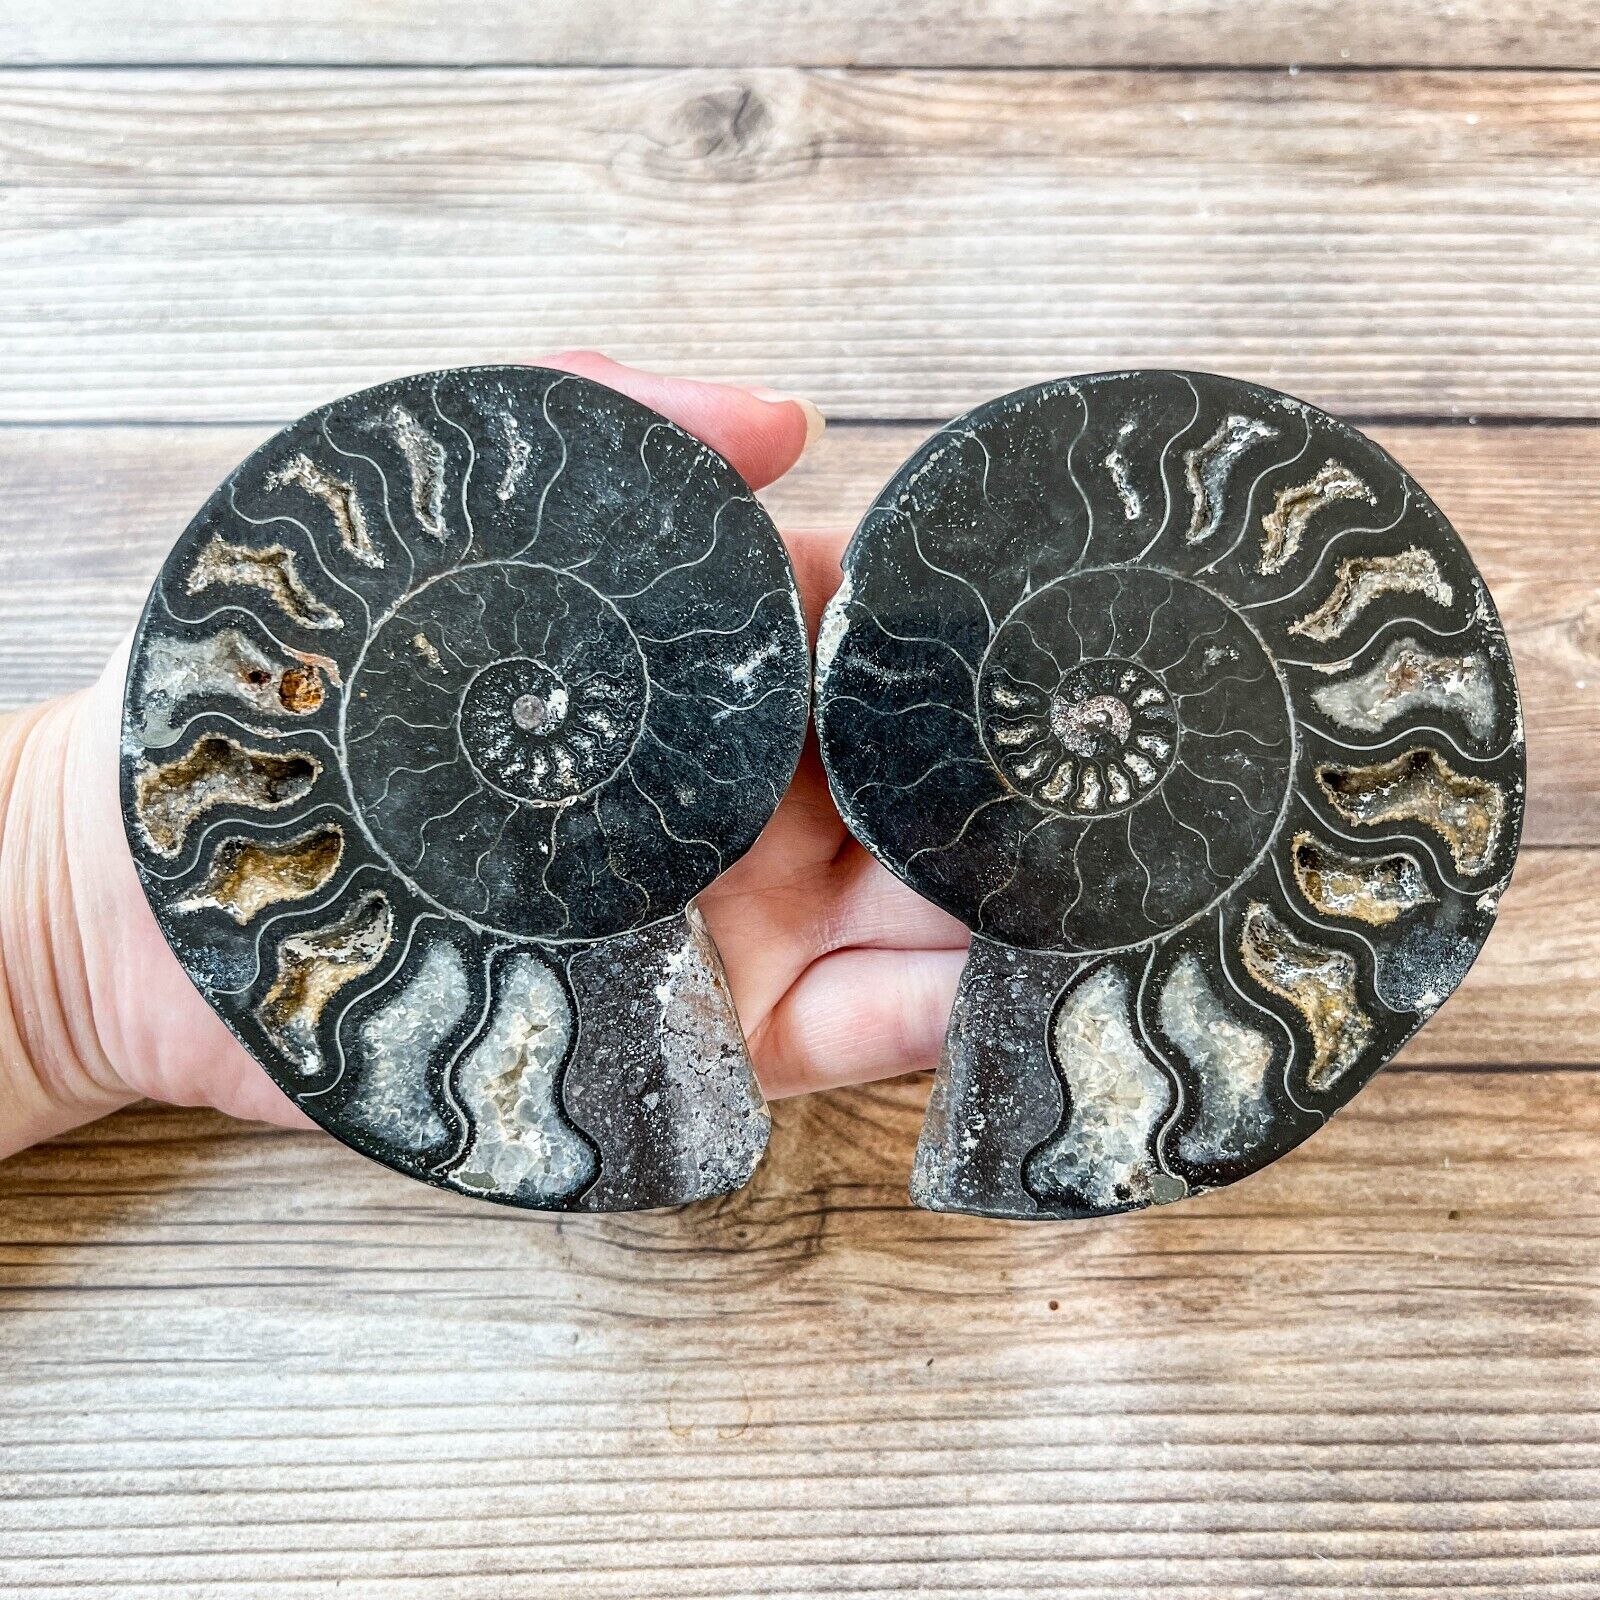 Ammonite Fossil Pair with Calcite Chambers 194g, Polished